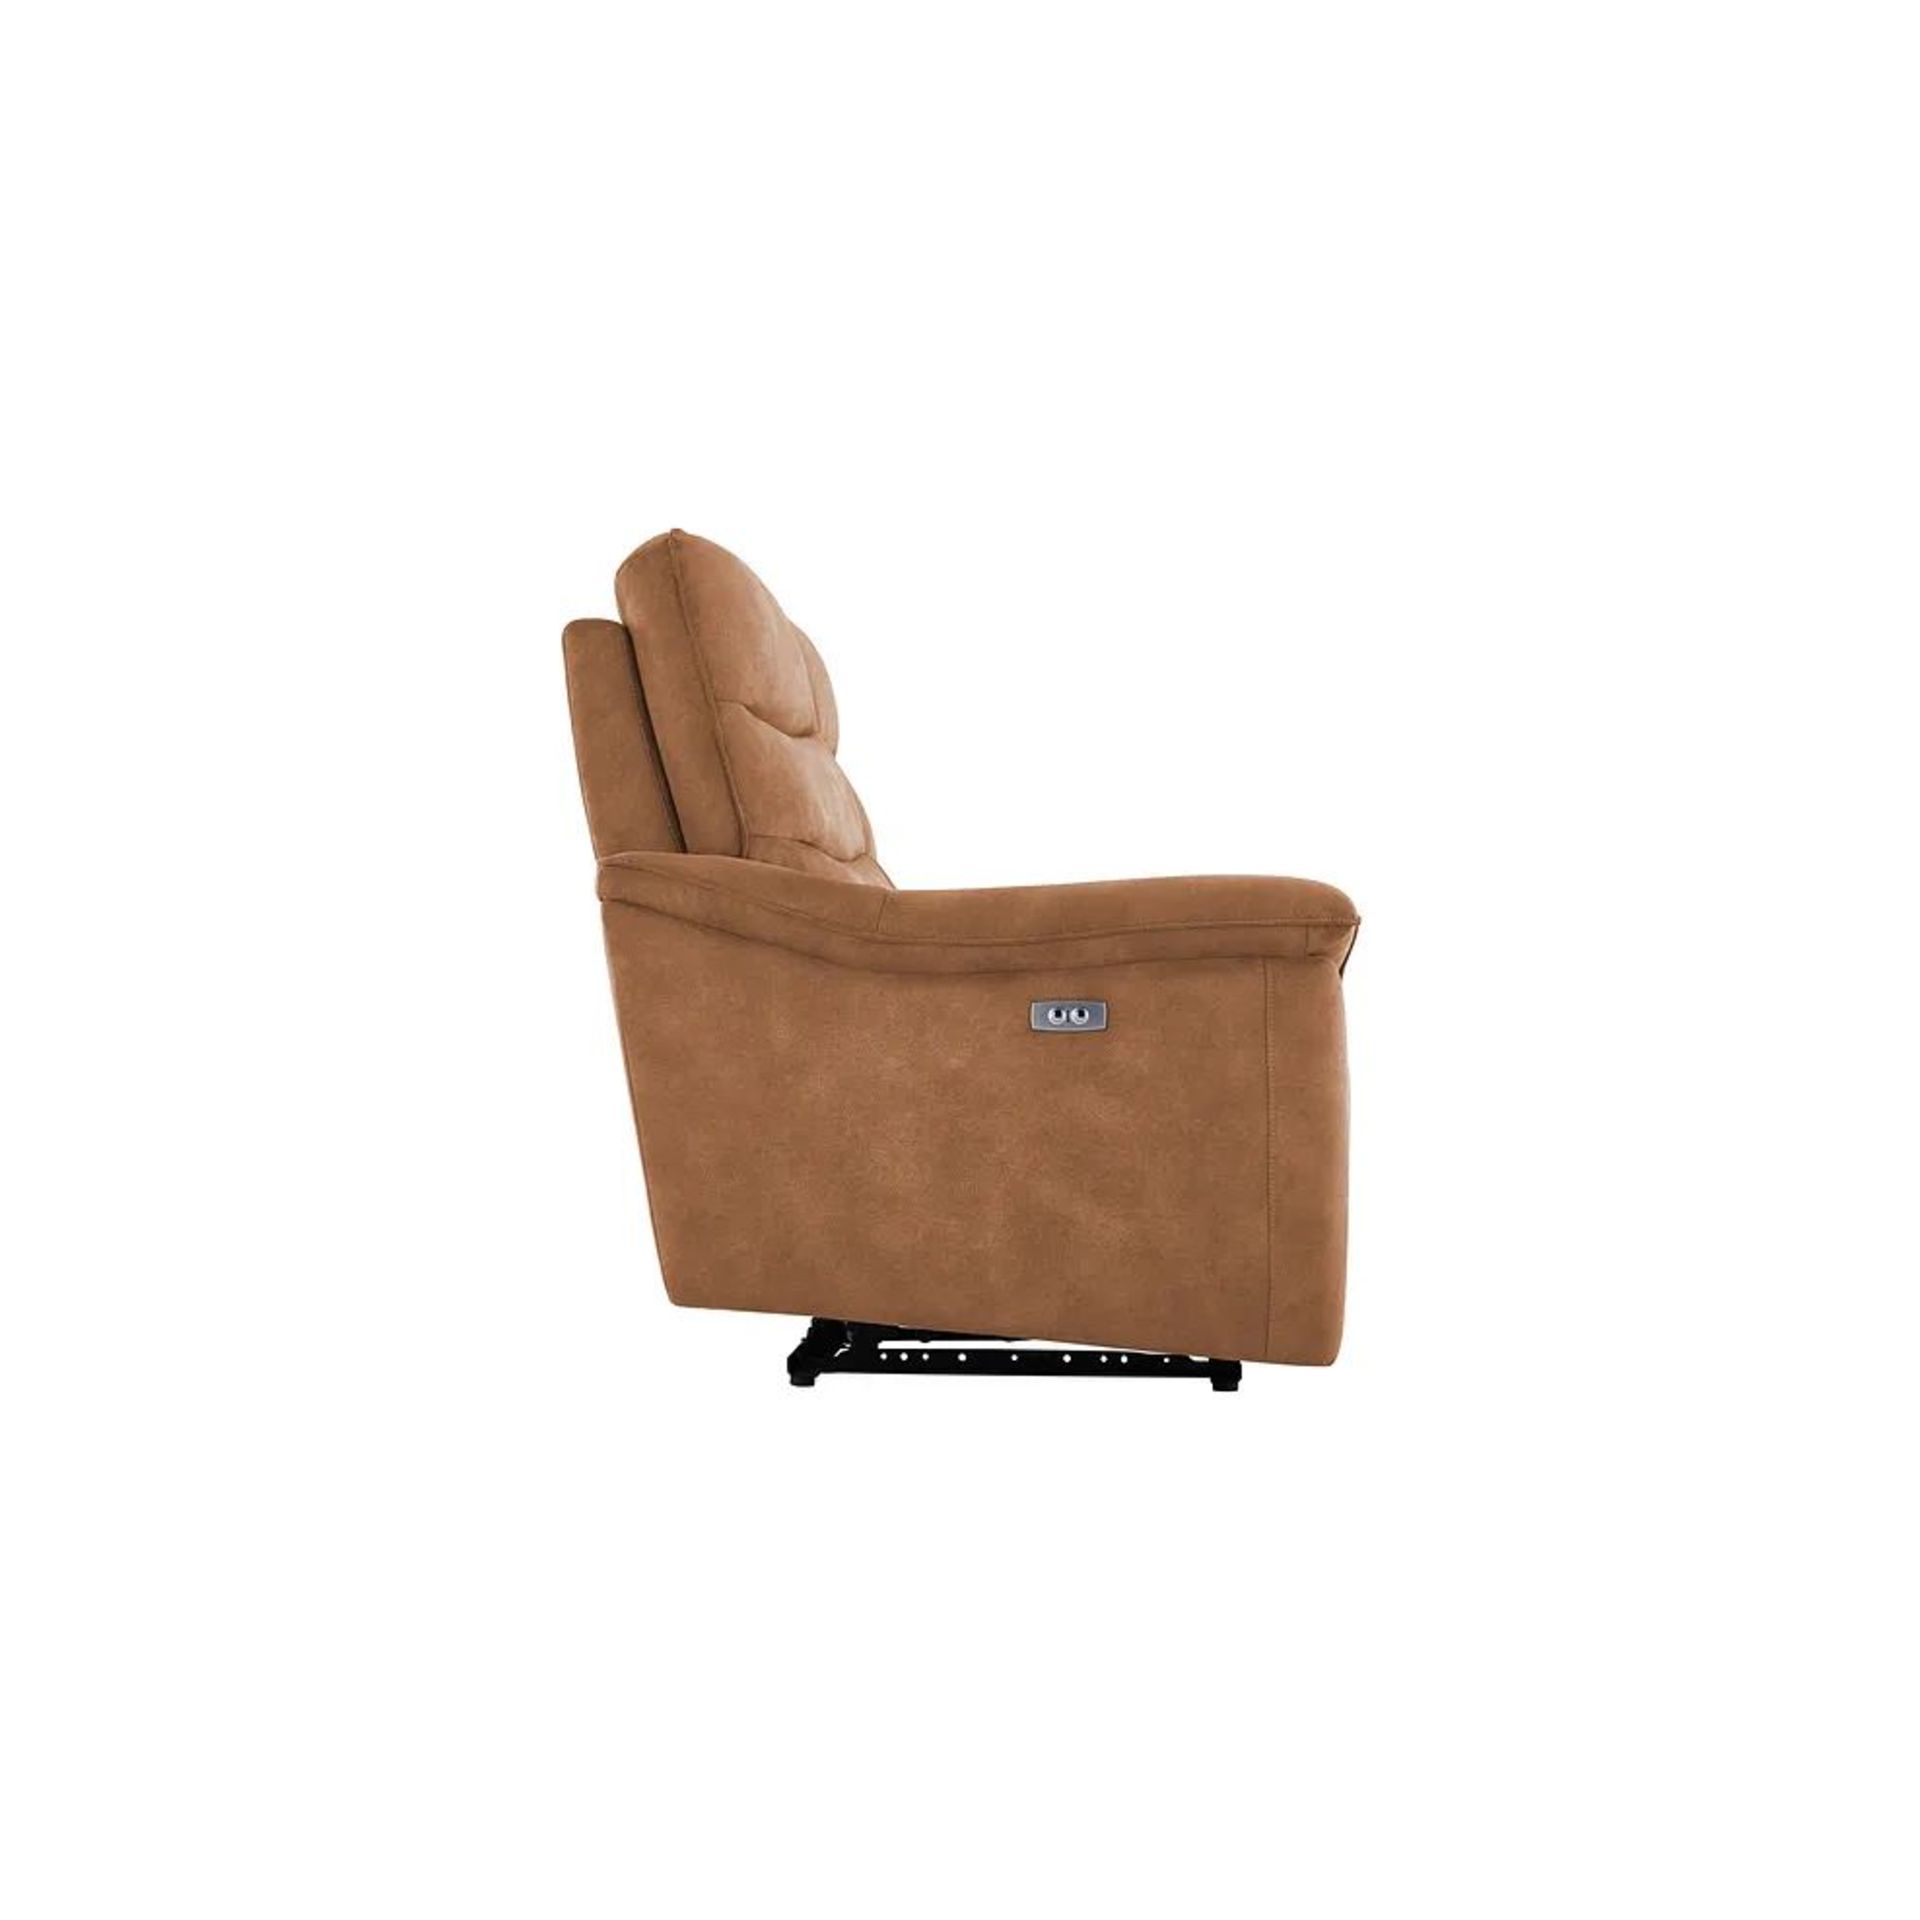 BRAND NEW CARTER 3 Seater Electric Recliner Sofa - BROWN FABRIC. RRP £1299. Shown here in Ranch - Image 7 of 12